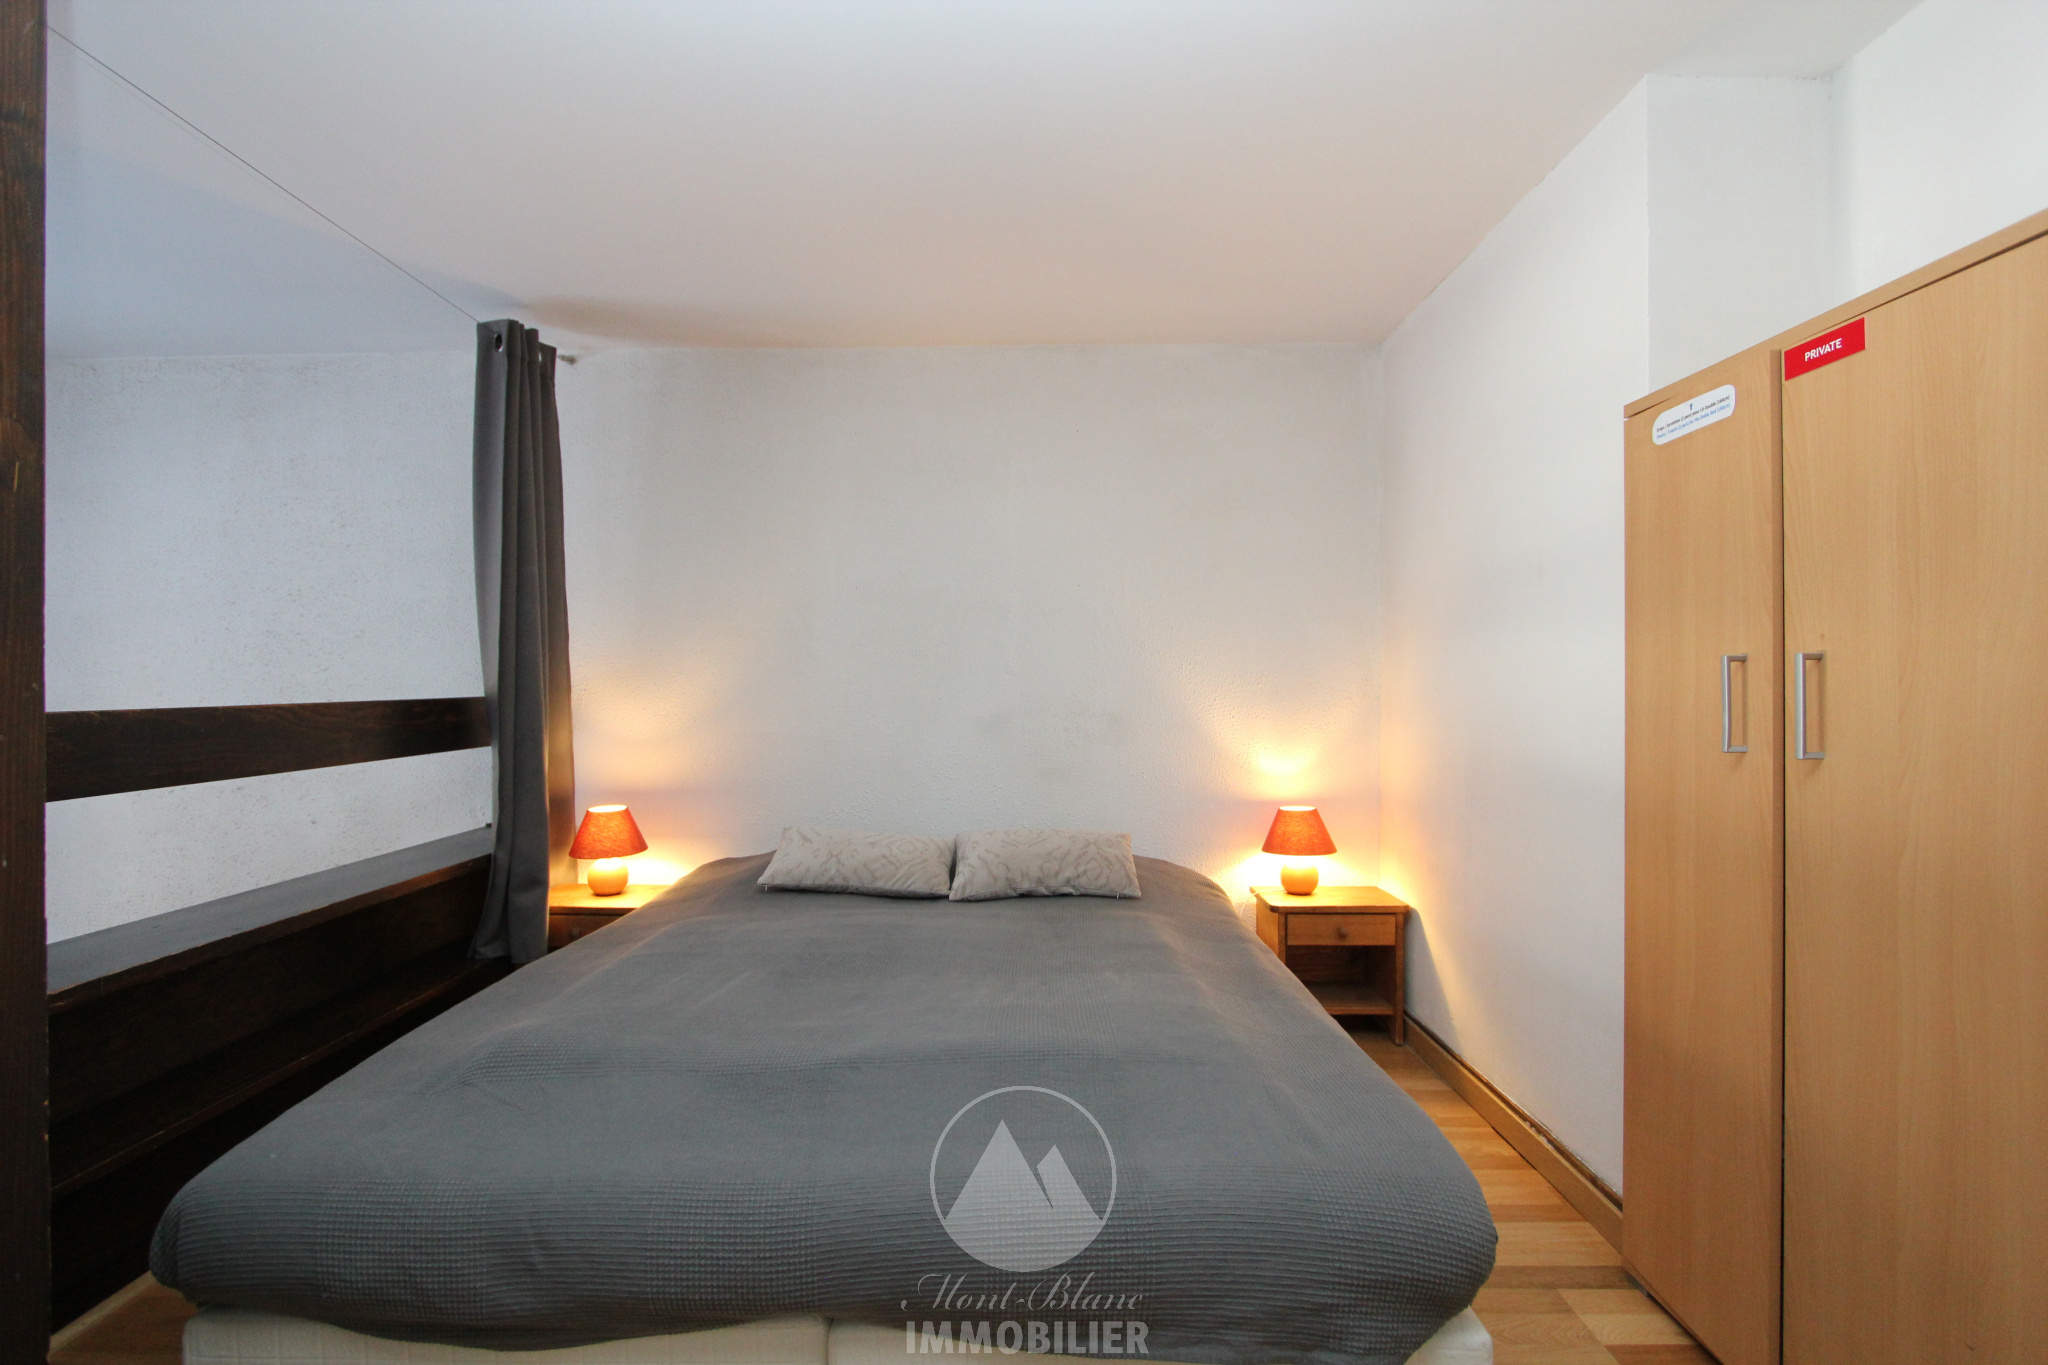 Photo of For sale for investors in Chamonix-Mont-Blanc (74): duplex